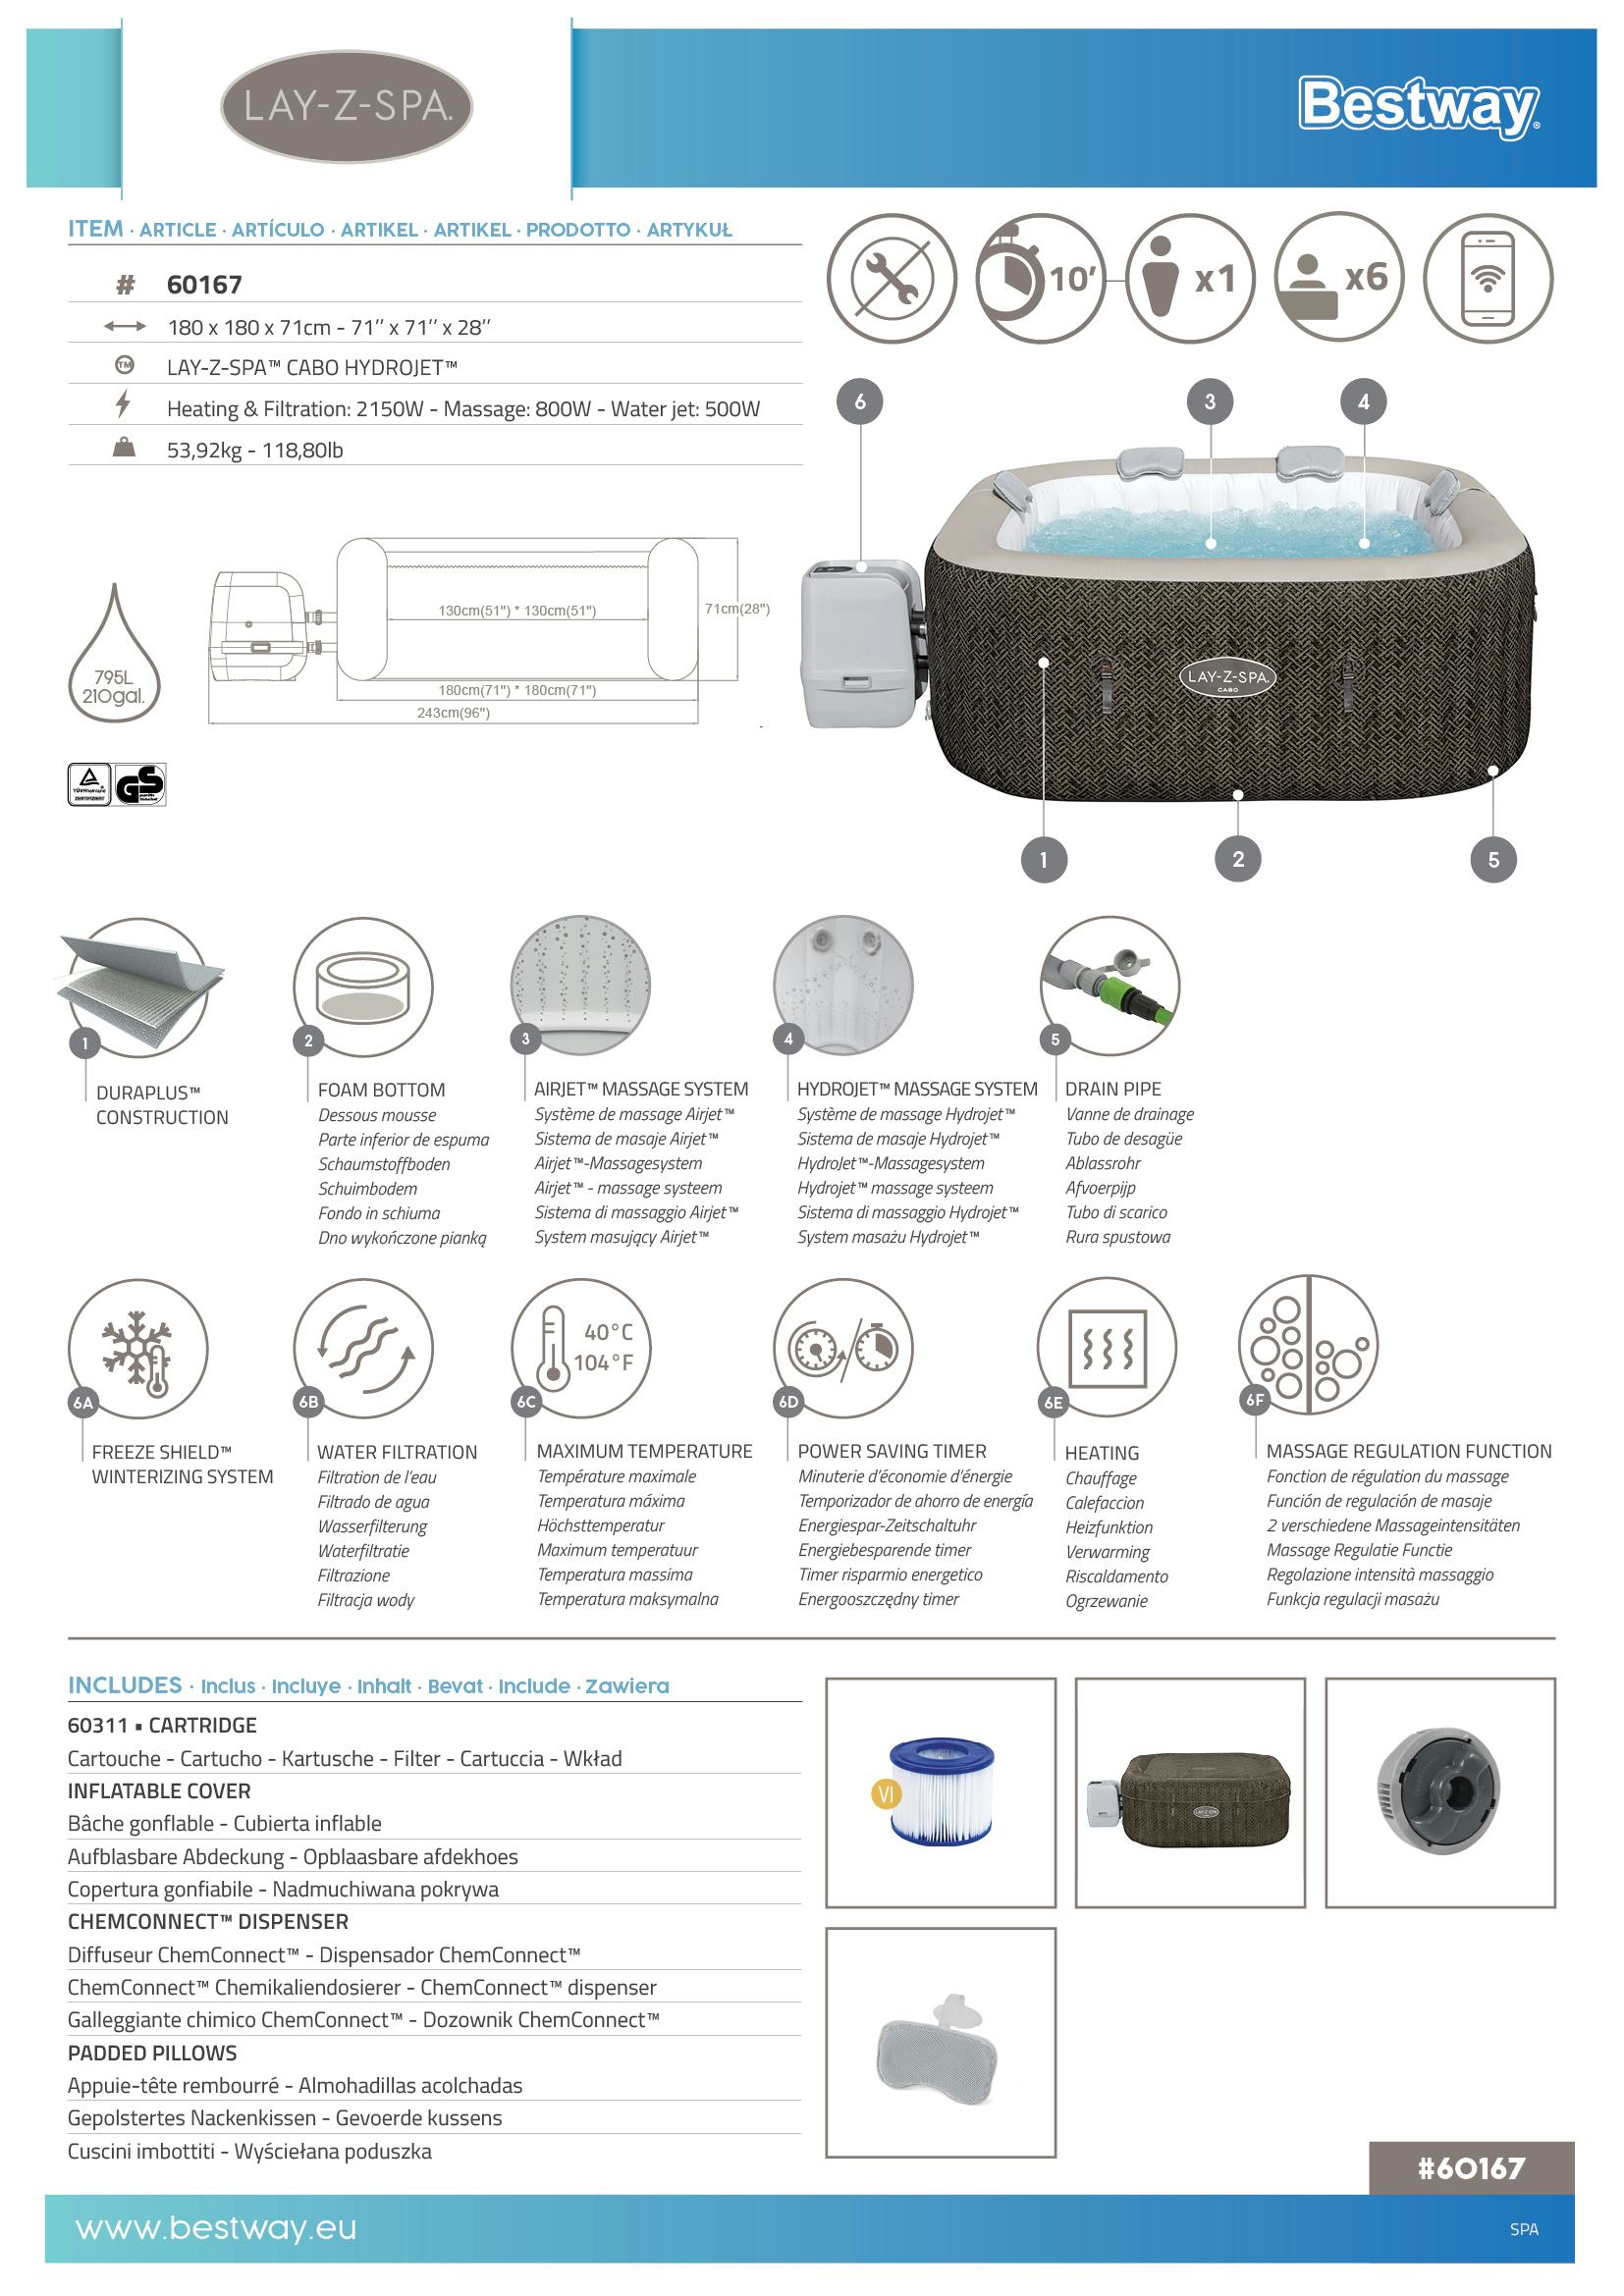 Spas Gonflables Spa gonflable carré Lay-Z-Spa Cabo Hydrojet™ 4-6 places Wifi Bestway 11